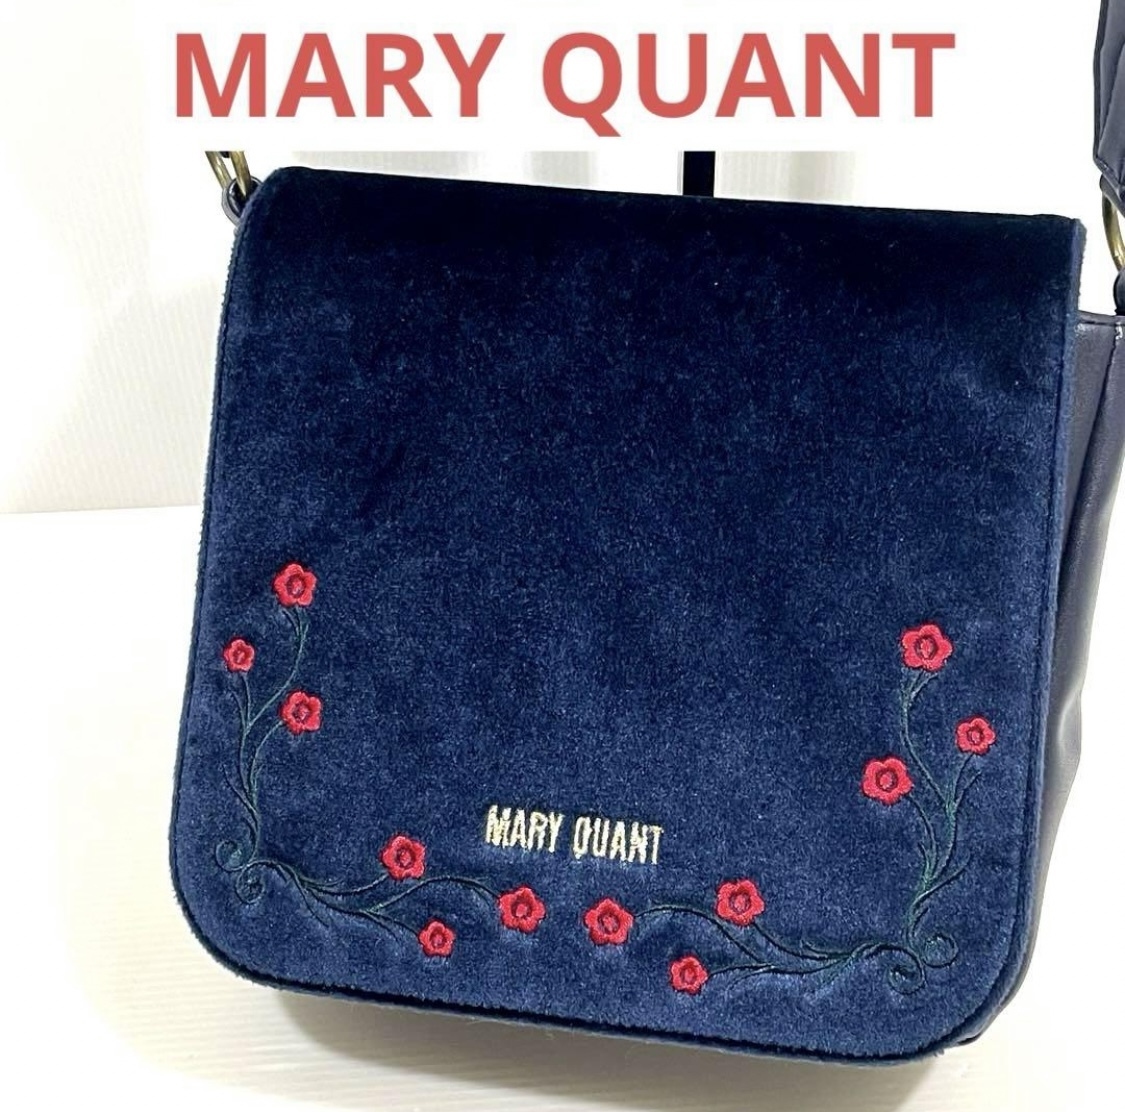  Mary Quant MARY QUANT embroidery floral print . lower shoulder bag 